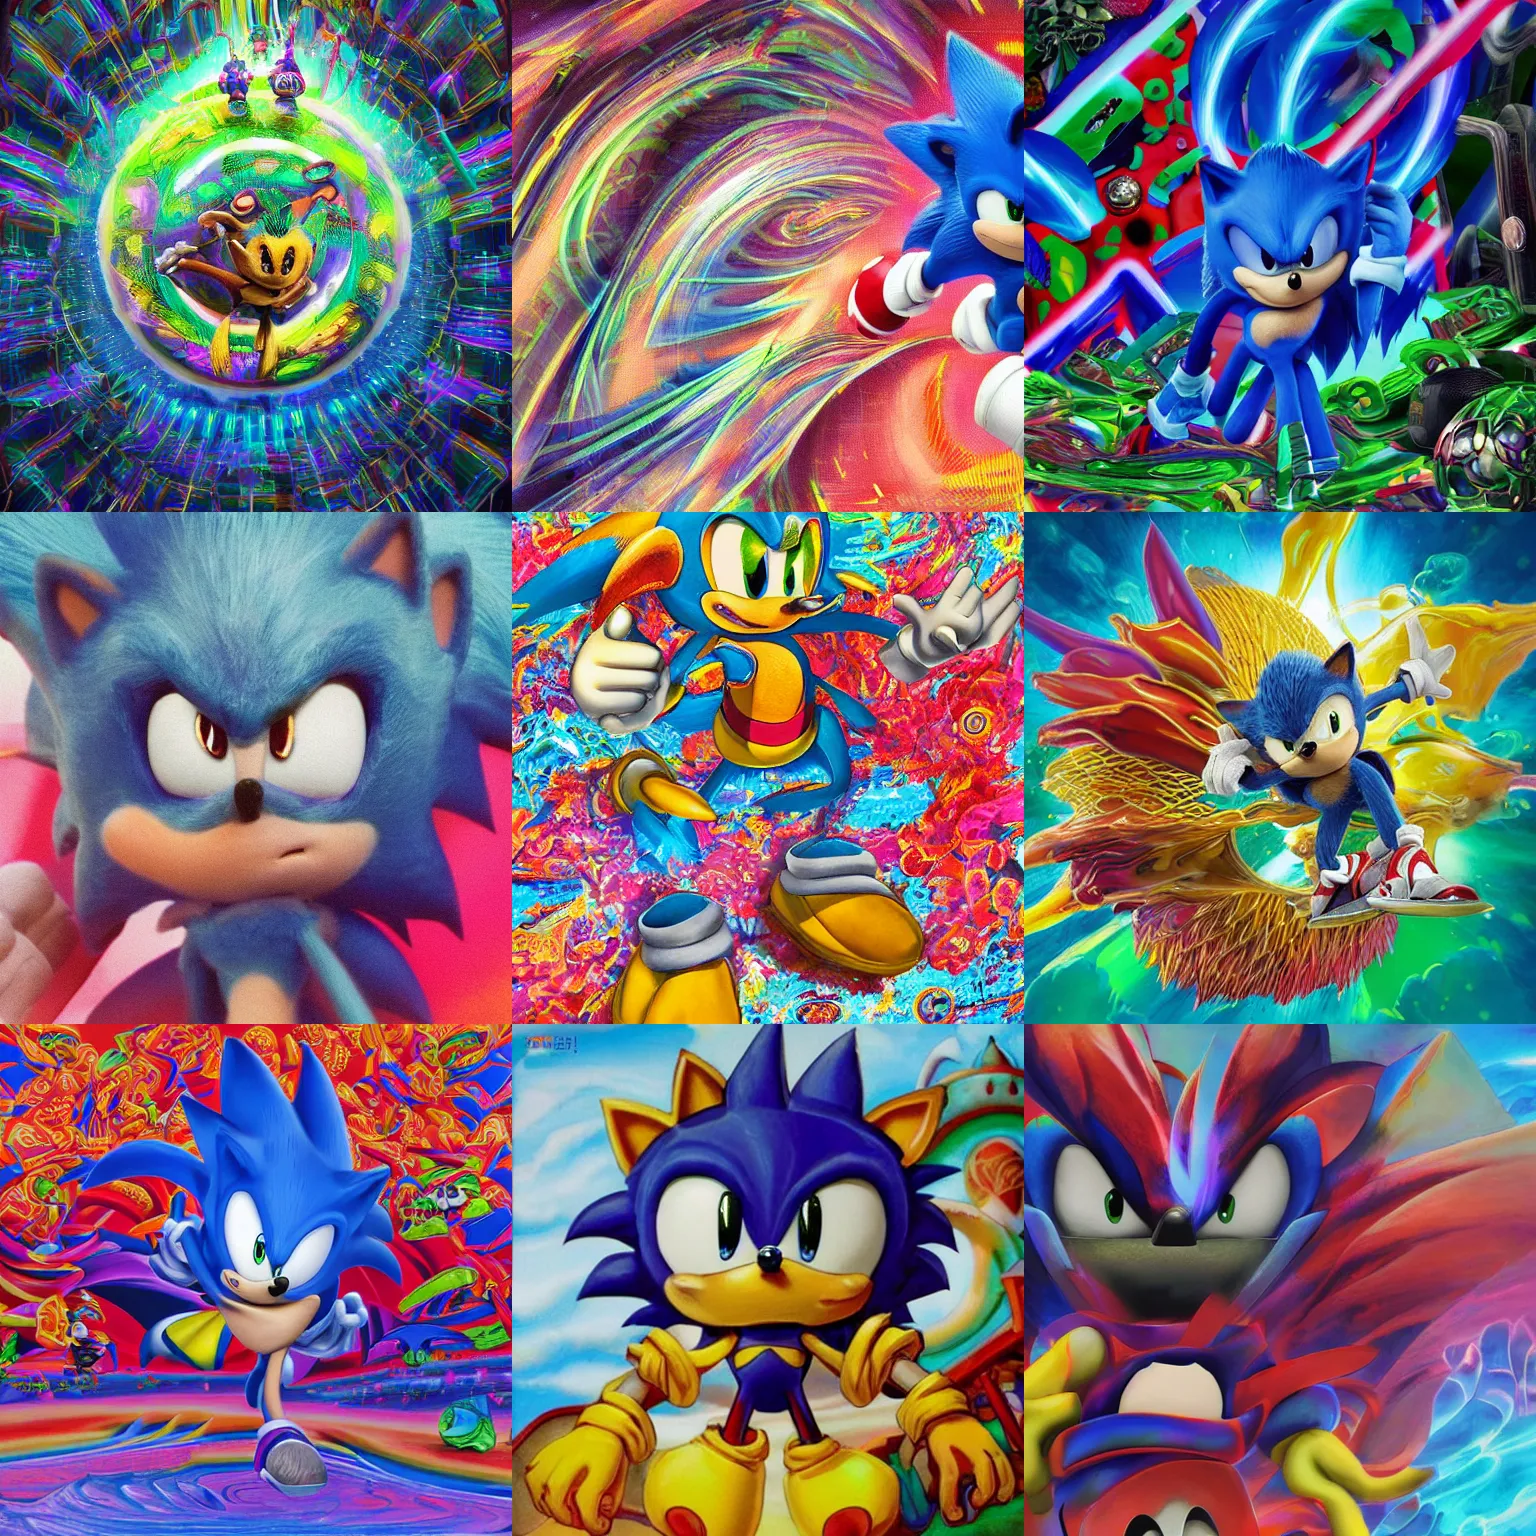 Prompt: close up sonic the hedgehog in a surreal, elastic, ornate, professional, high quality airbrush art mgmt shpongle album cover of a chrome dissolving LSD DMT blue sonic the hedgehog surfing through vaporwave taffy frosting , checkerboard horizon , 1980s 1982 Sega Genesis video game album cover